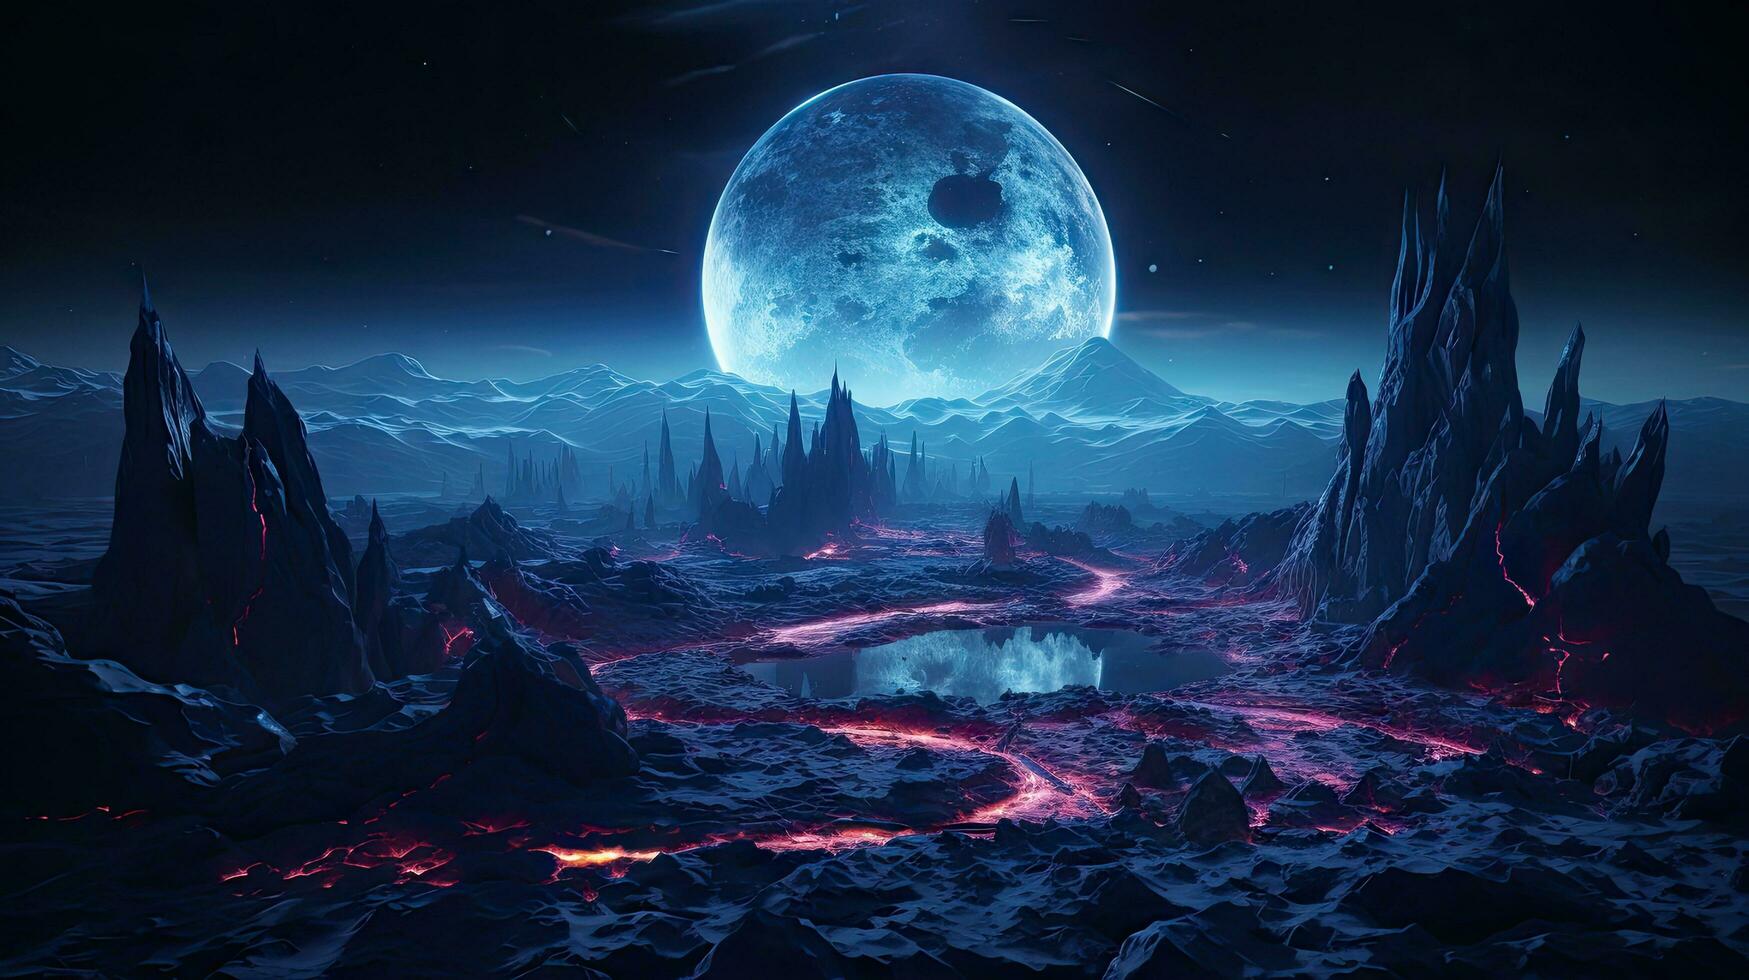 Stars, planets, fantasy landscapes of the future. Futuristic space sci-fi abstract background Sci-fi landscape with planets, neon lights, cool planets, 3D render. photo